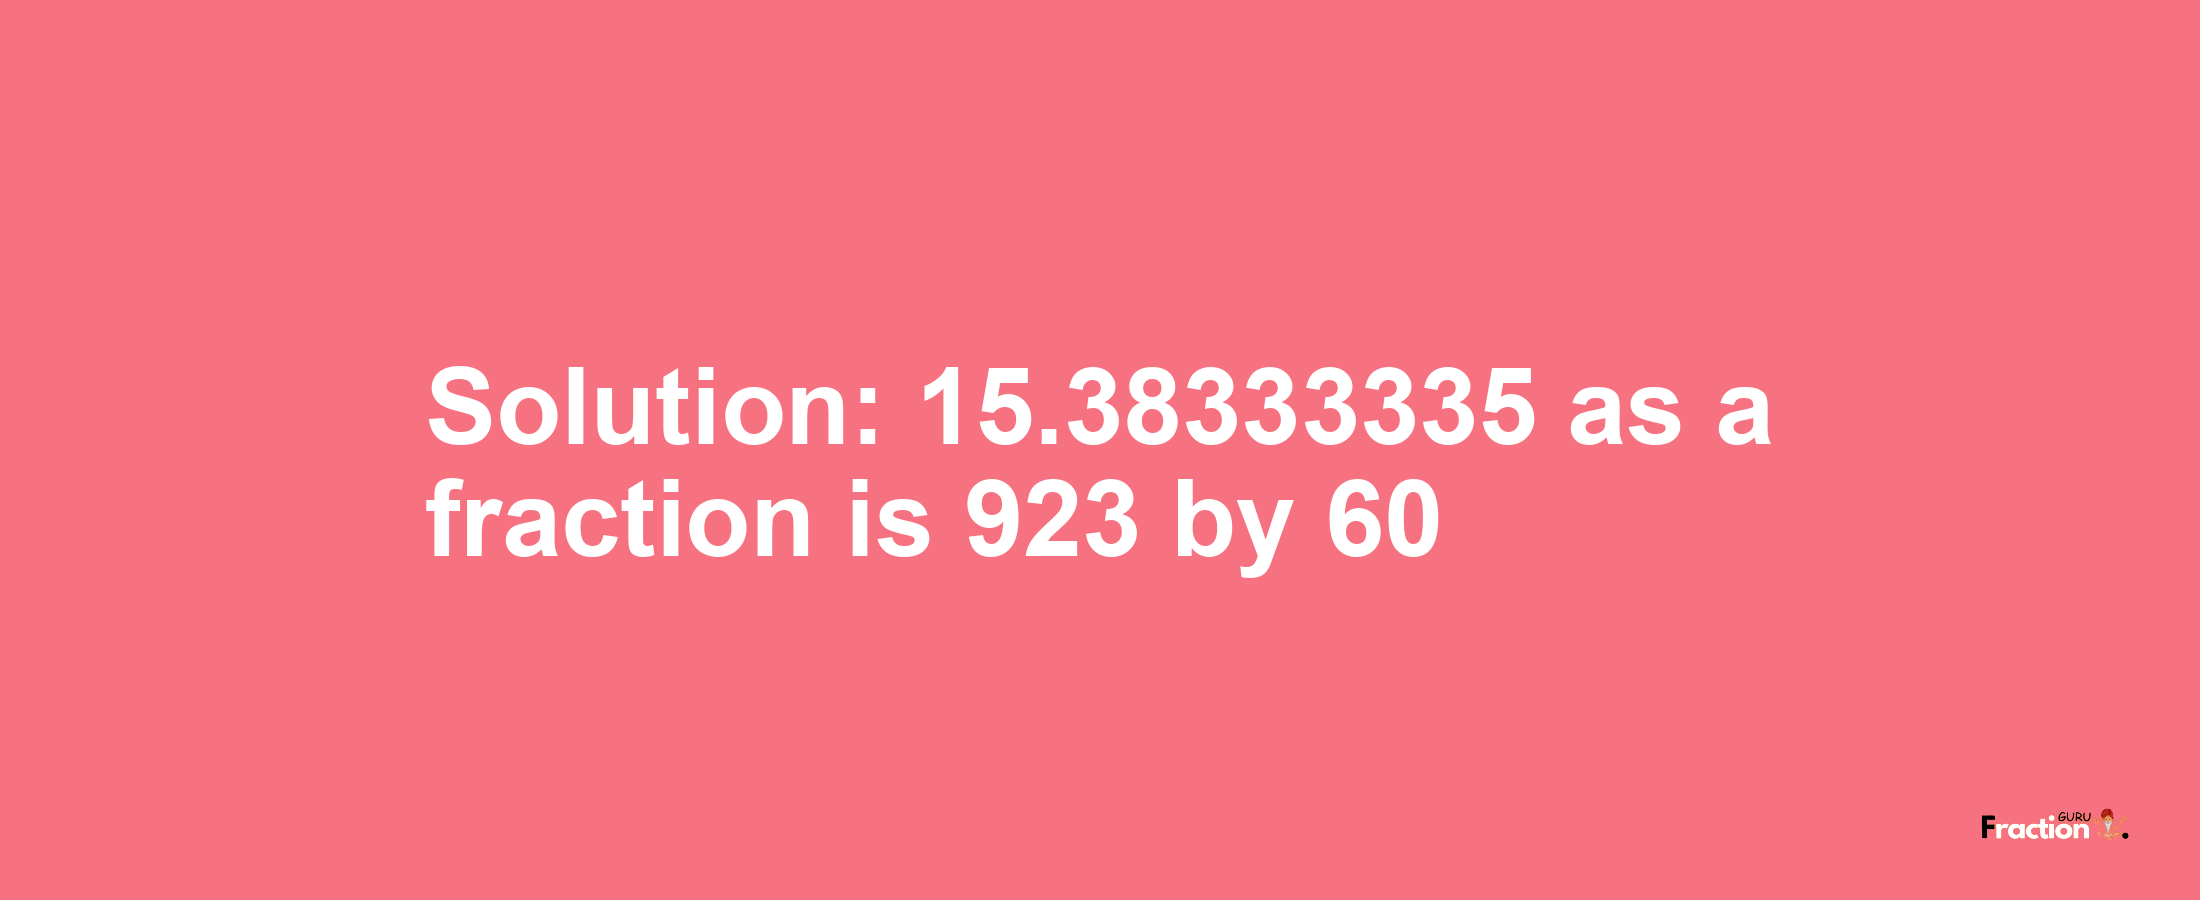 Solution:15.38333335 as a fraction is 923/60